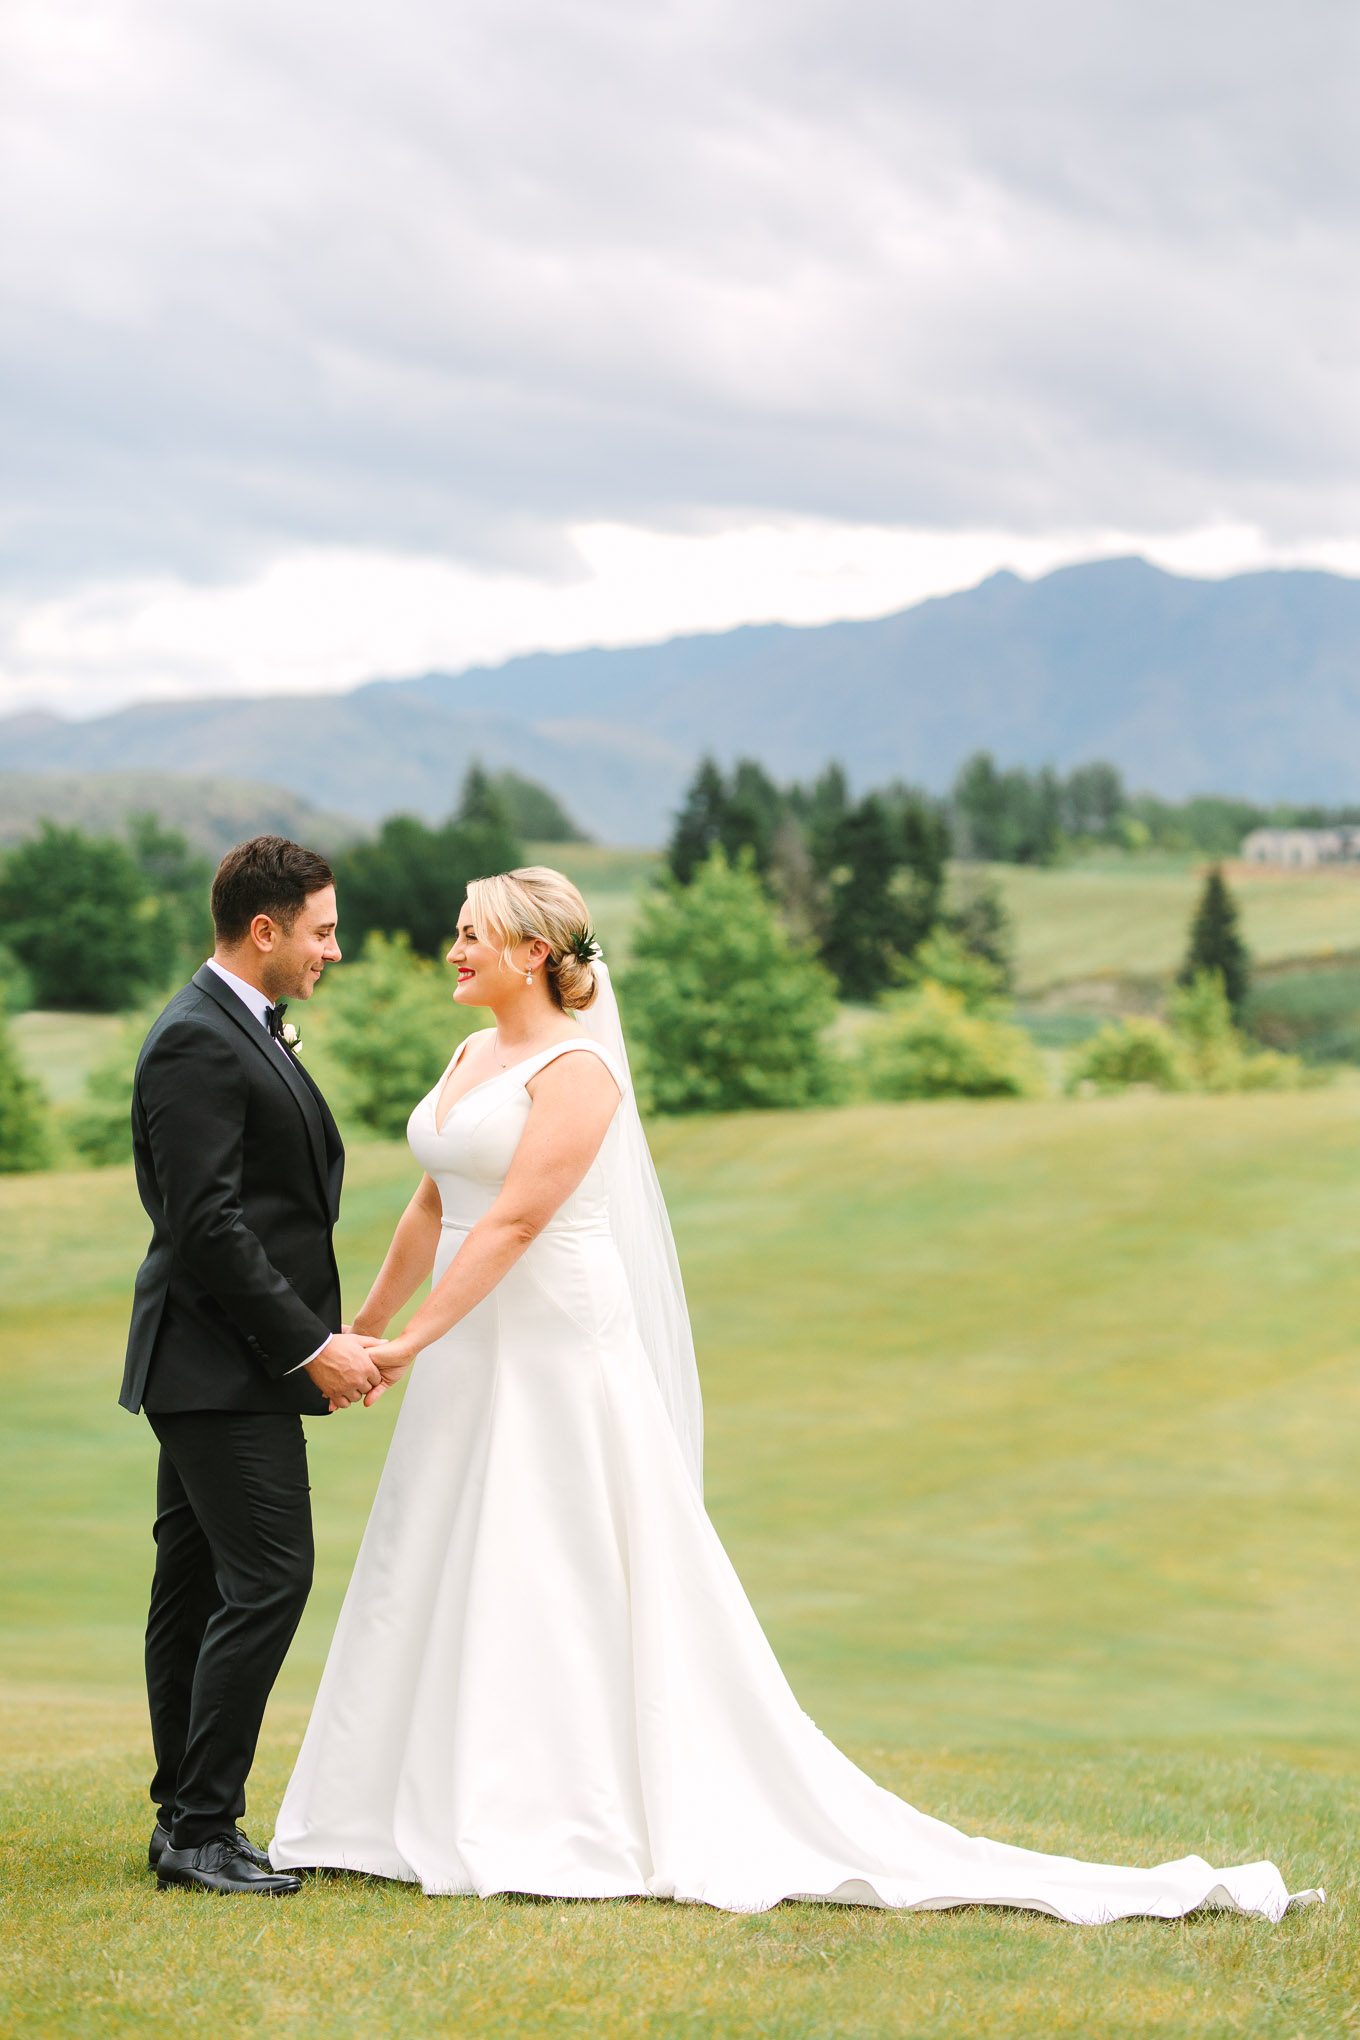 Bride and groom first look on hillside. Millbrook Resort Queenstown New Zealand wedding by Mary Costa Photography | www.marycostaweddings.com